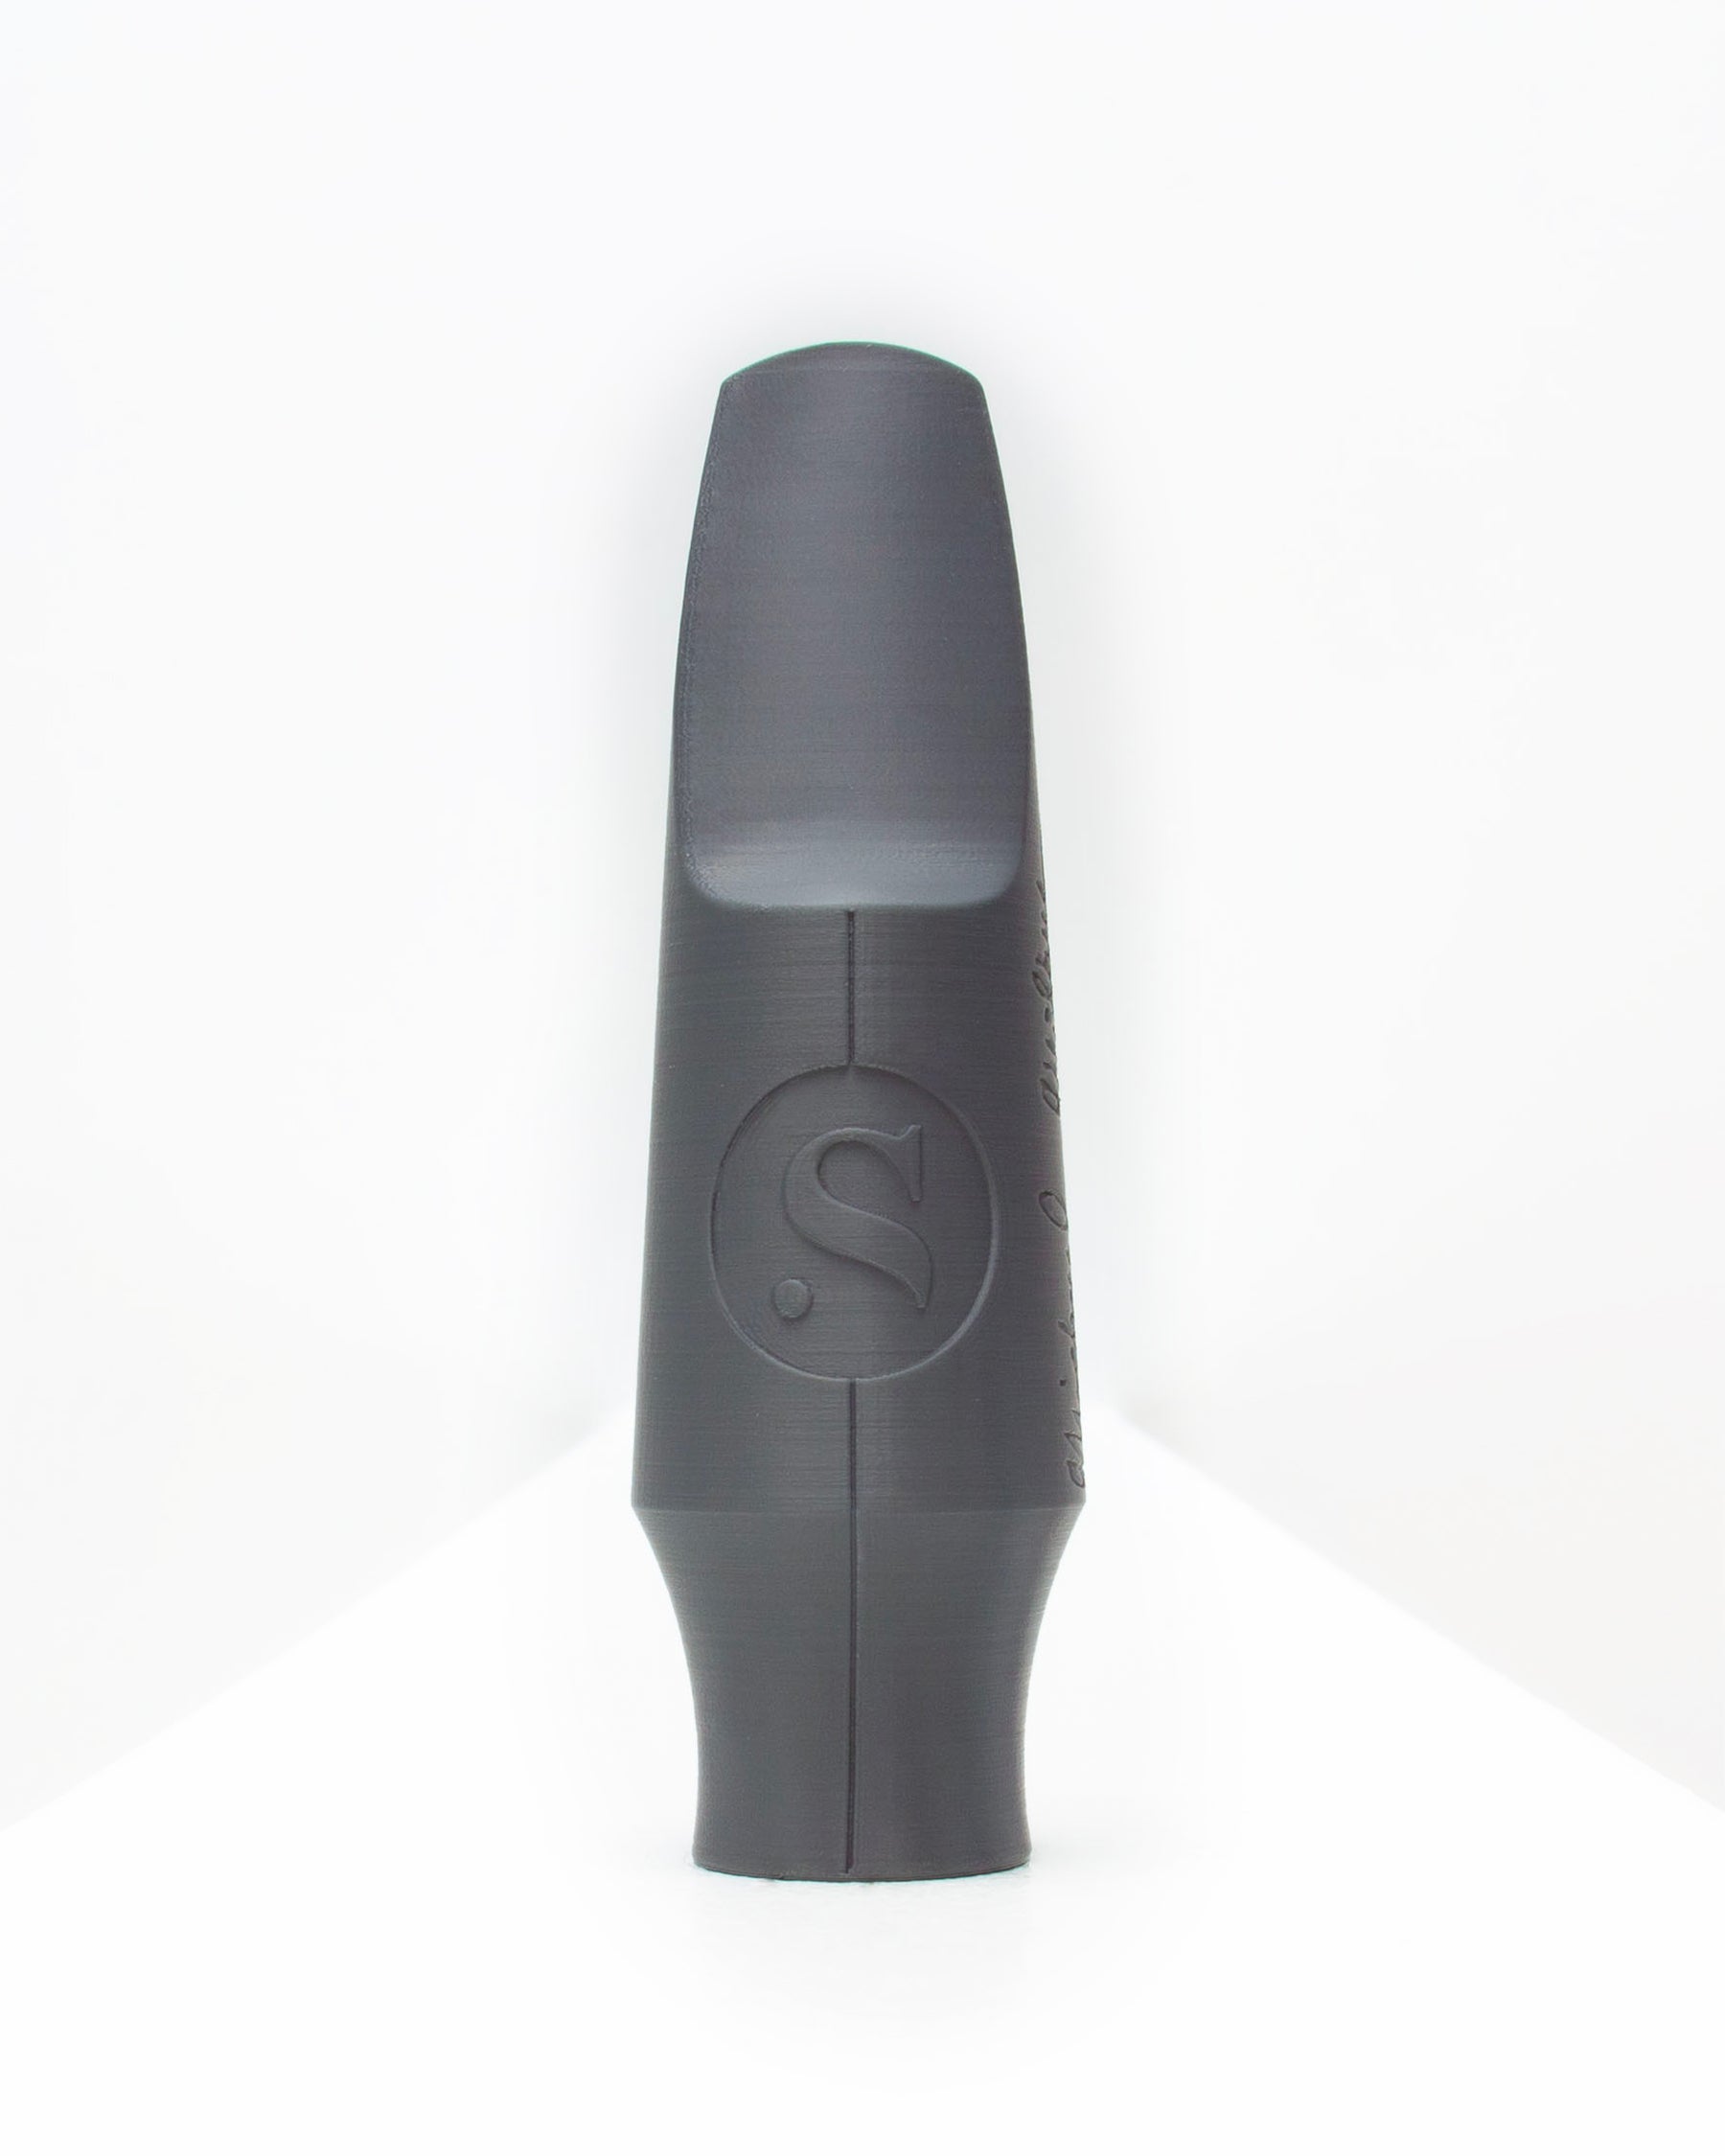 Tenor Signature Saxophone mouthpiece - Eddie Rich by Syos - 9 / Anthracite Metal